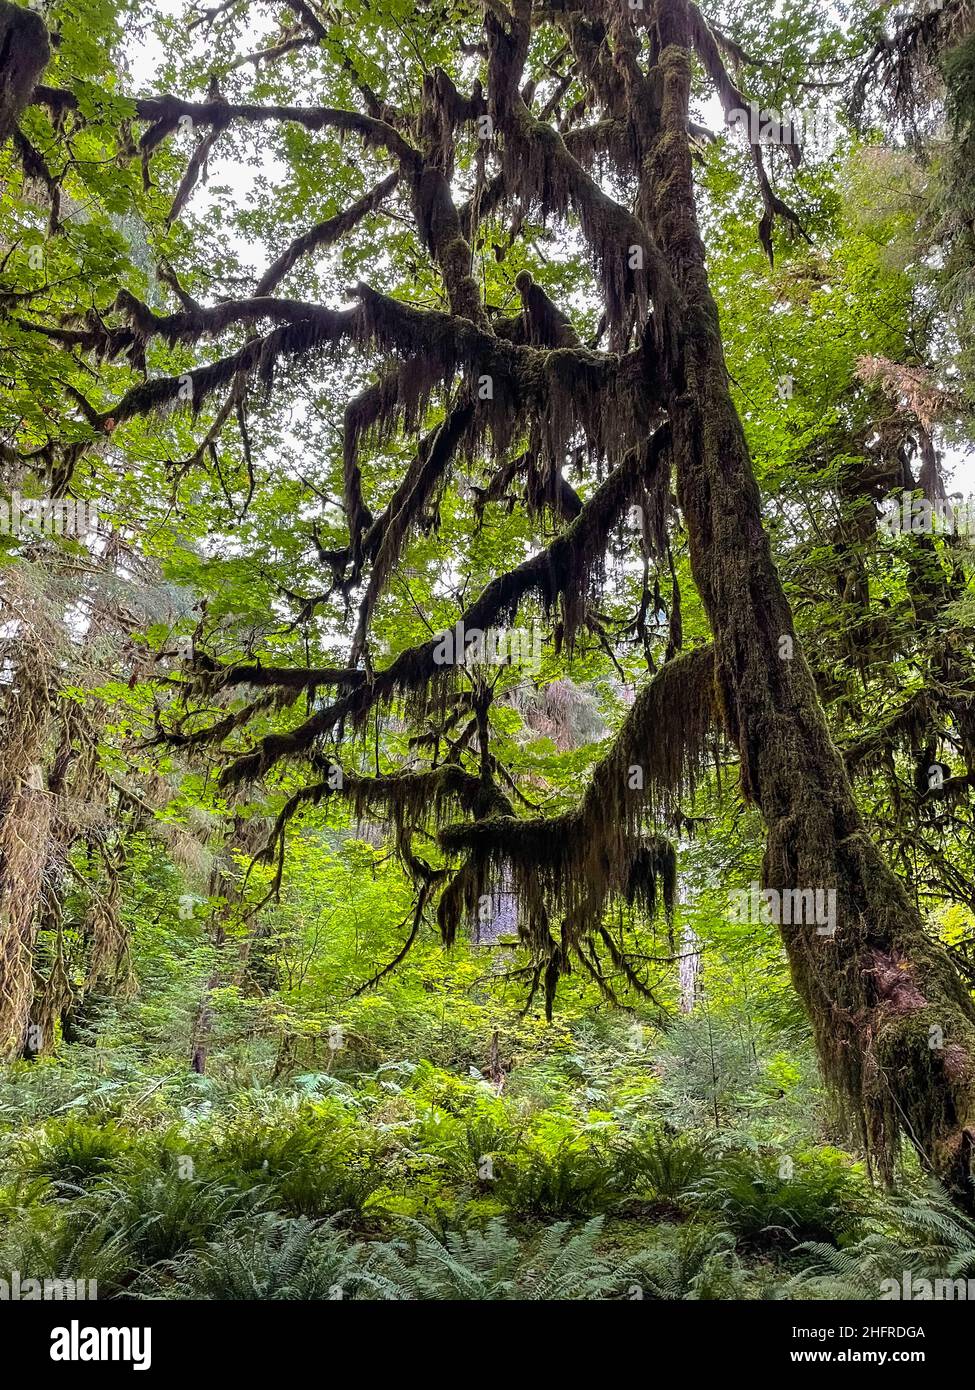 Hoh Rainforest is located on the Olympic Peninsula in the Pacific Northwest. It is located in western Washington state, and is one of the largest temp Stock Photo